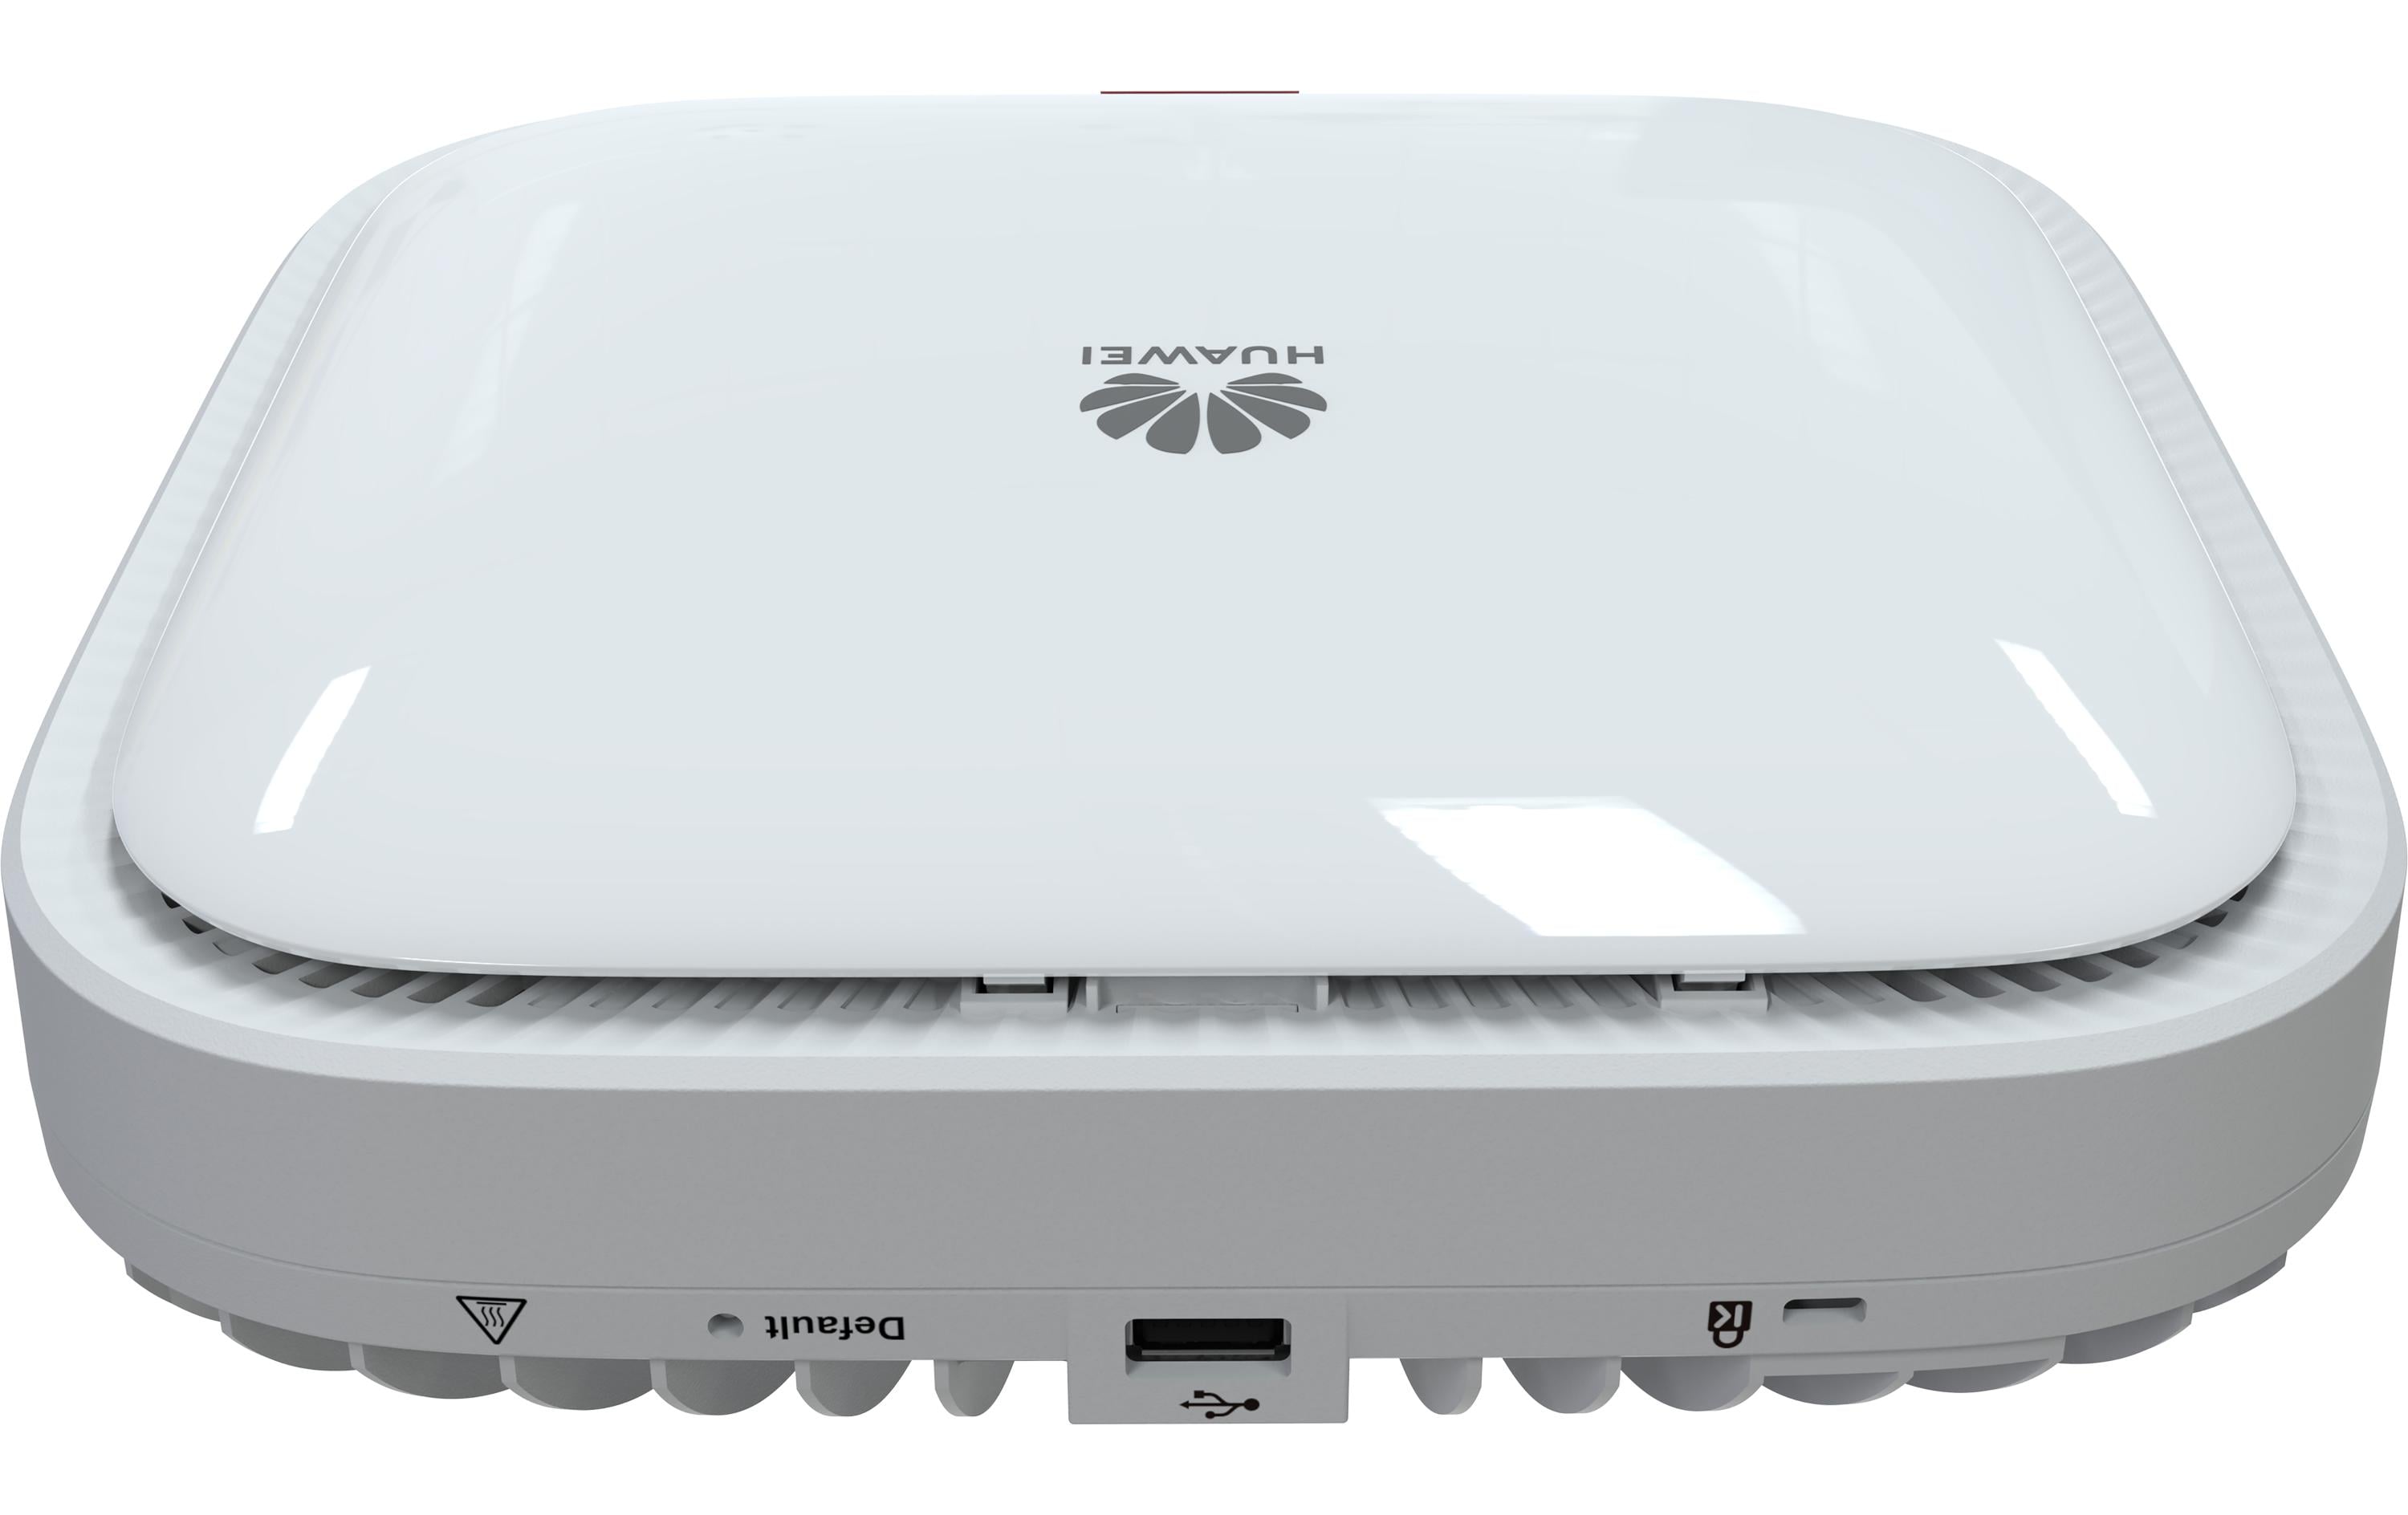 Huawei Access Point AirEngine 8760-X1-PRO